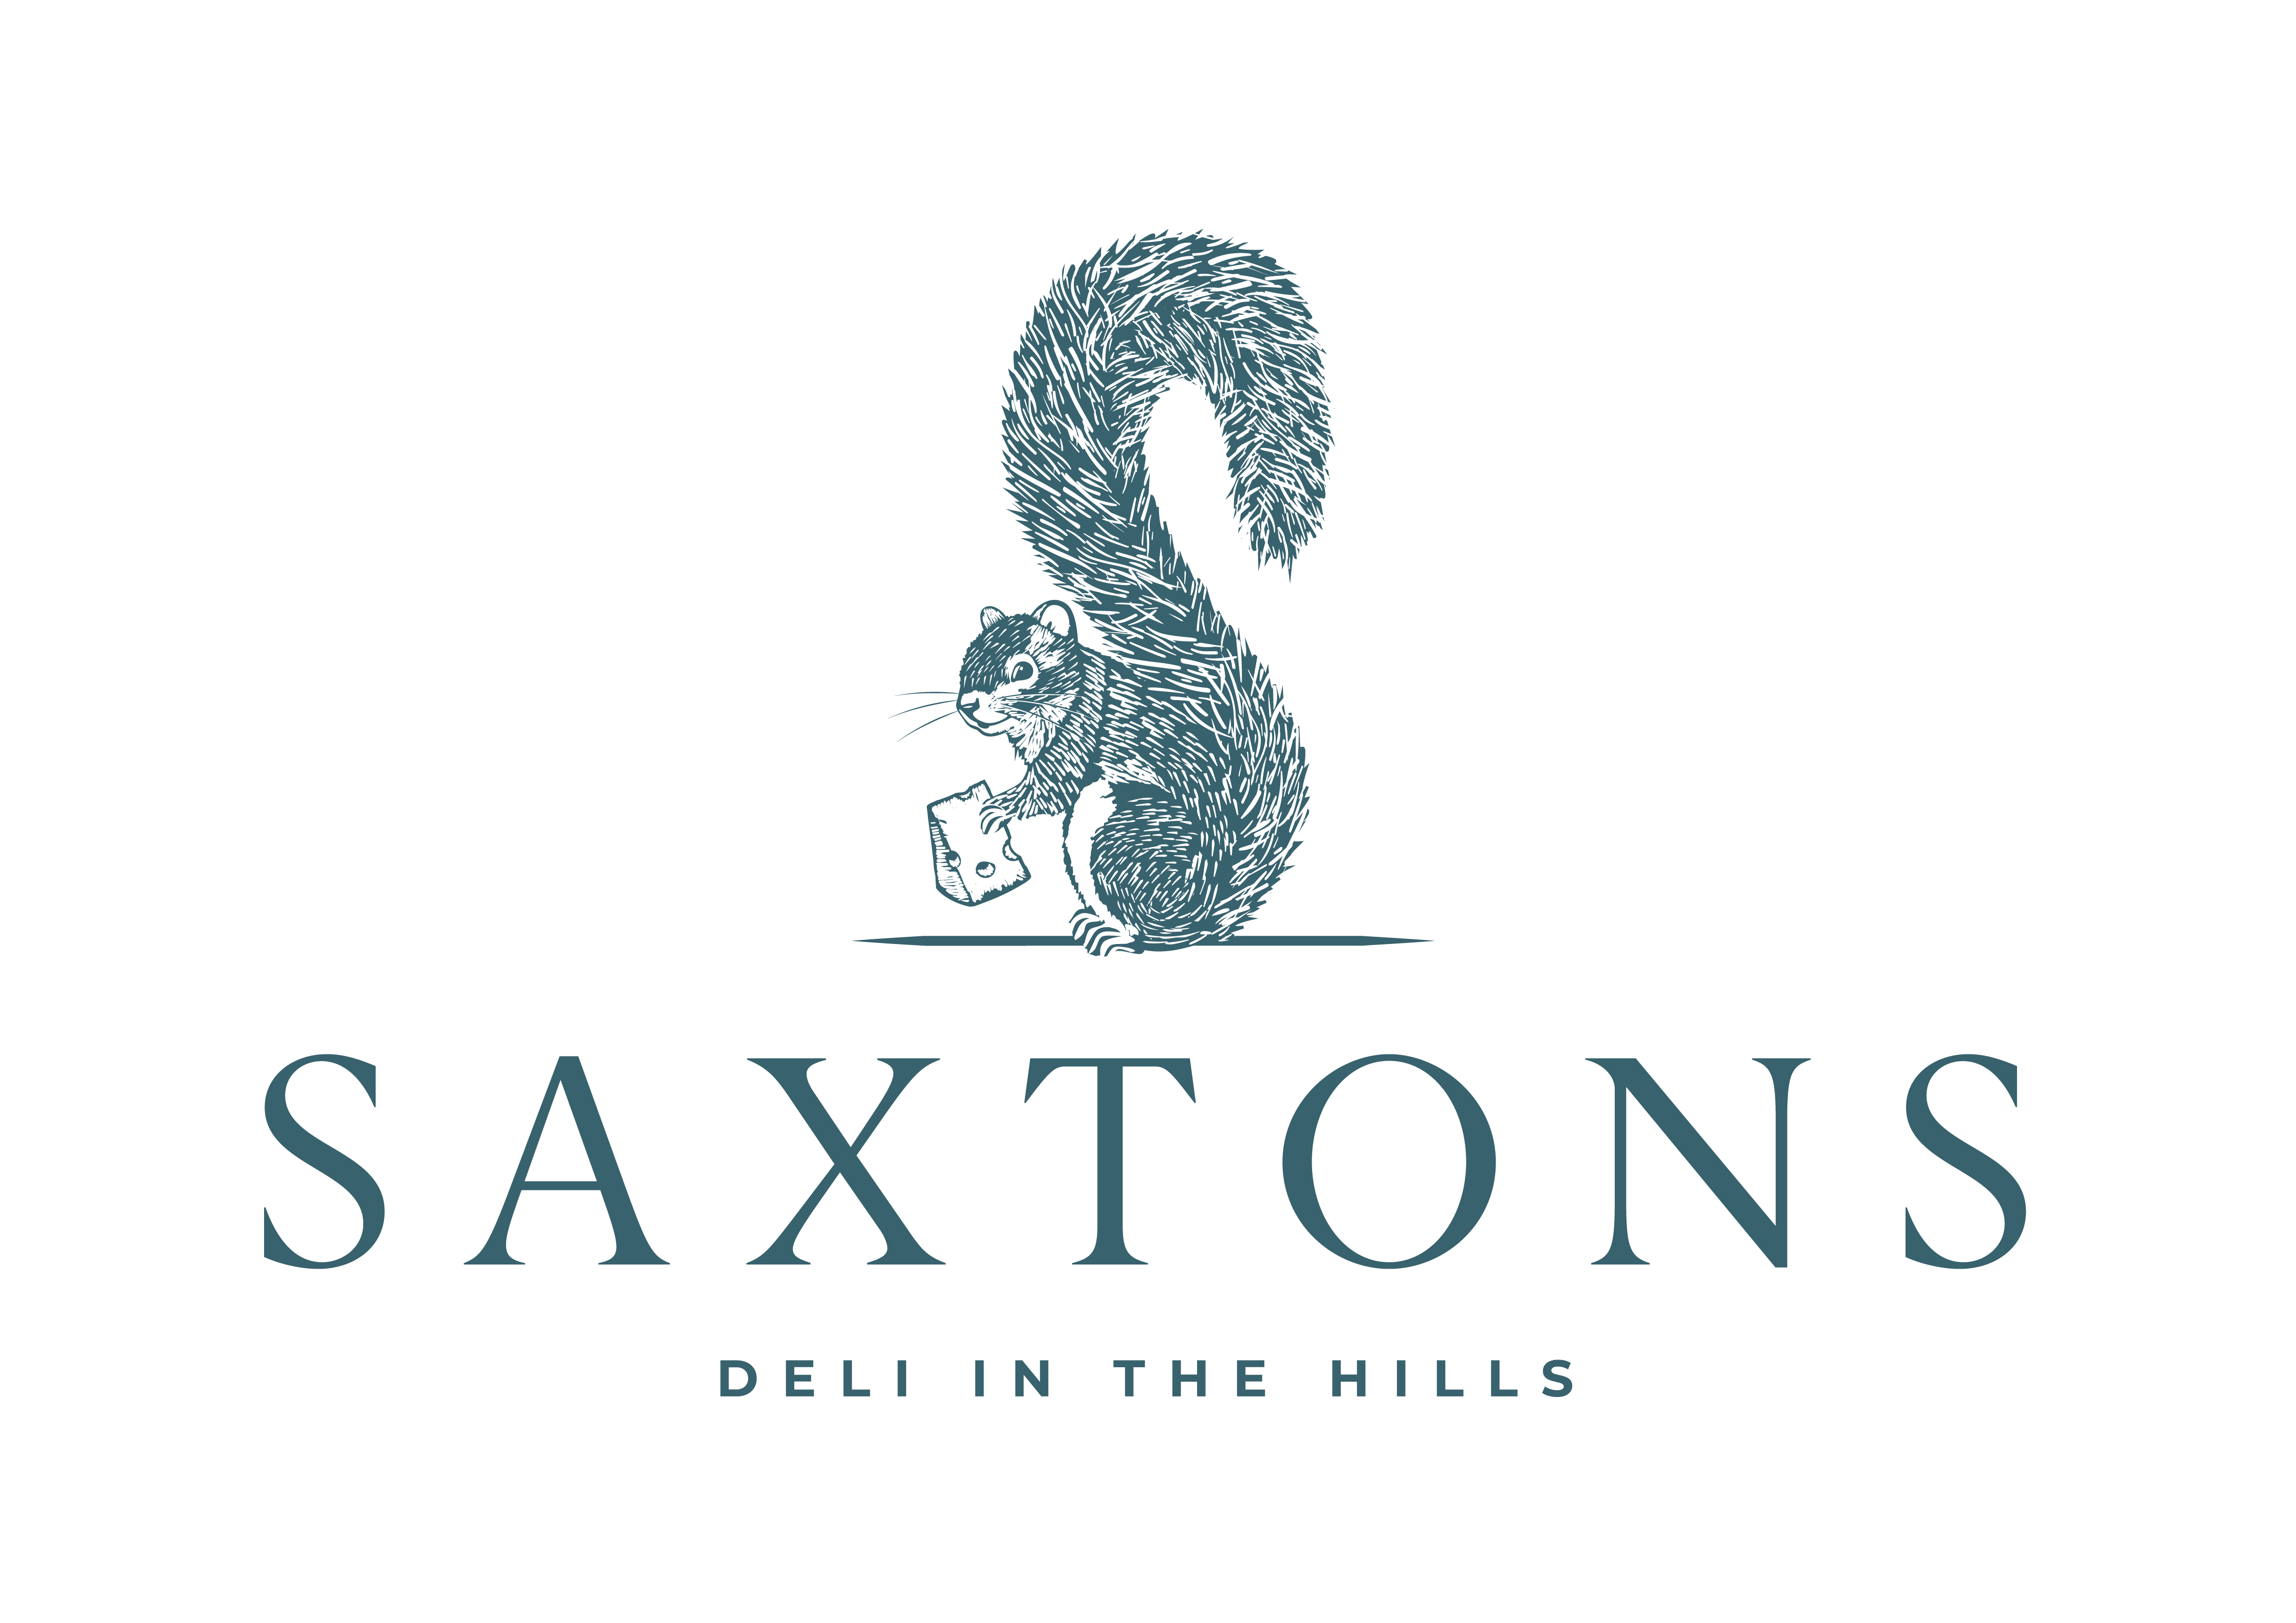 Saxtons Deli logo with Squirrel holding cheese illustration